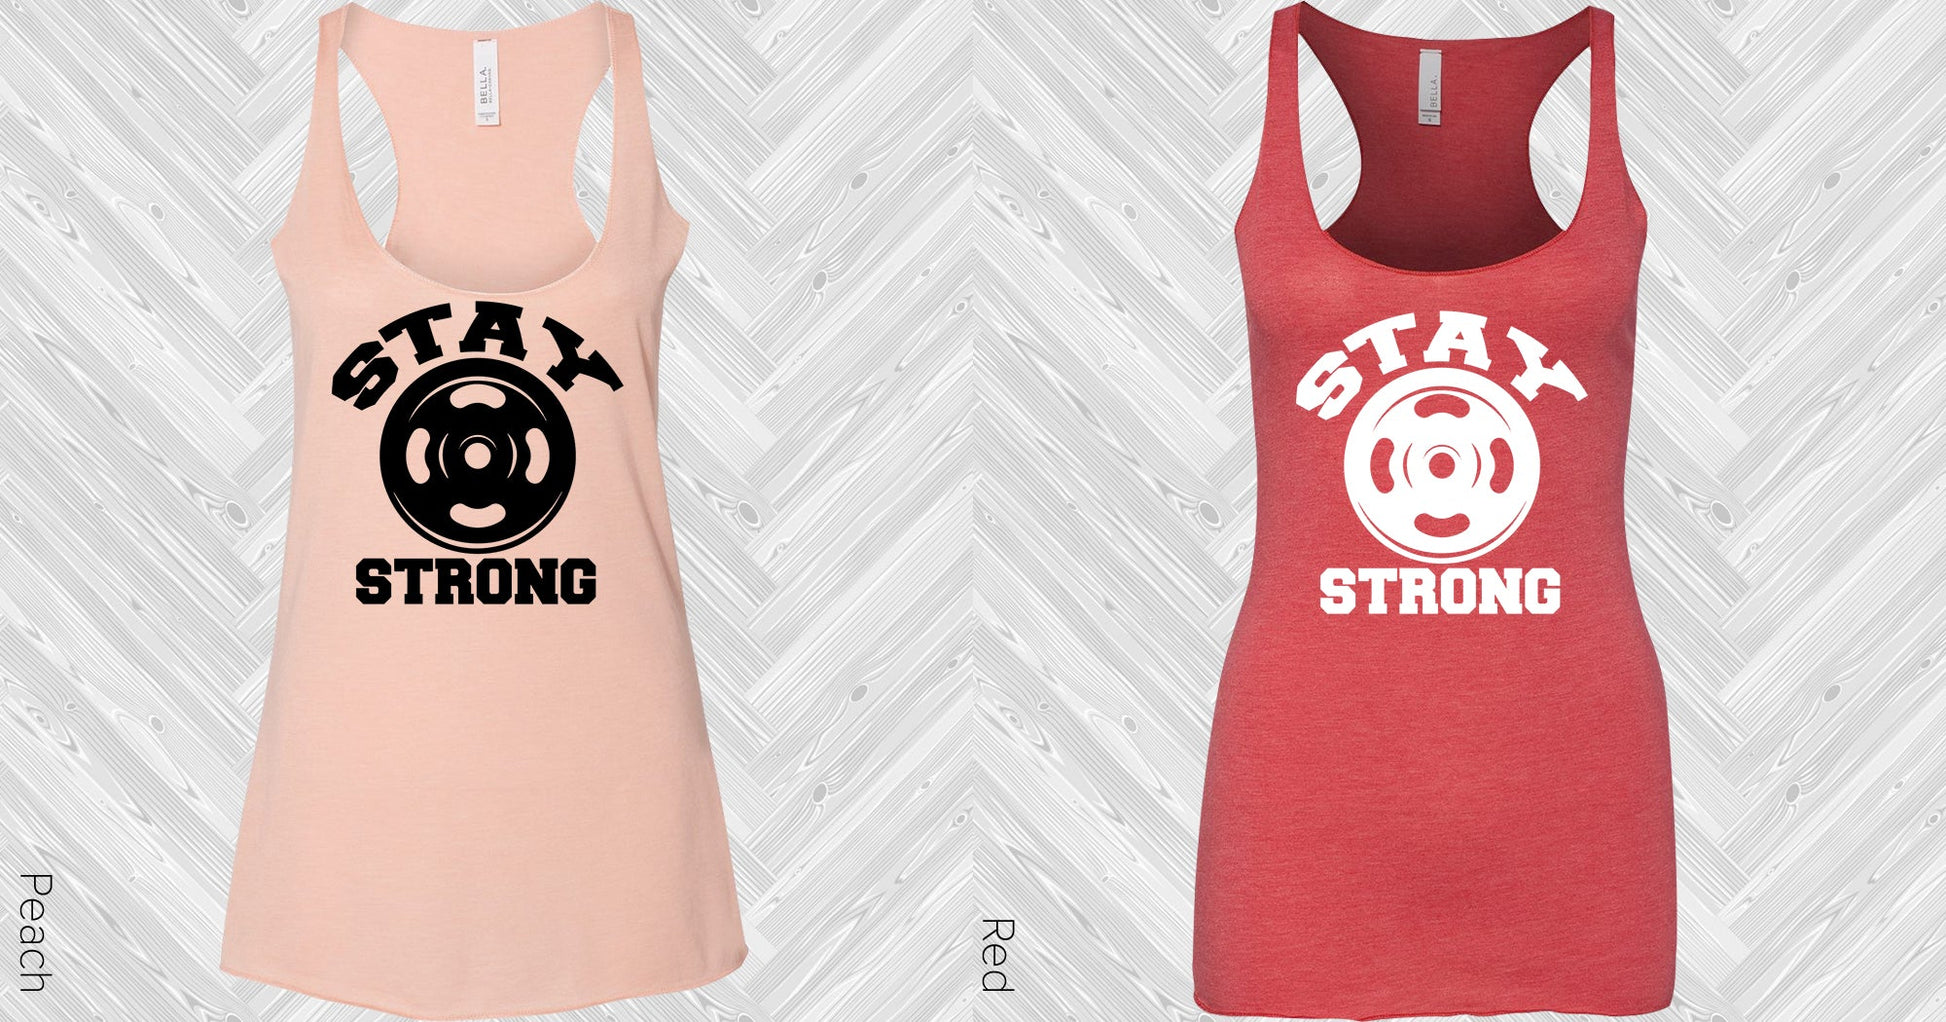 Stay Strong Graphic Tee Graphic Tee